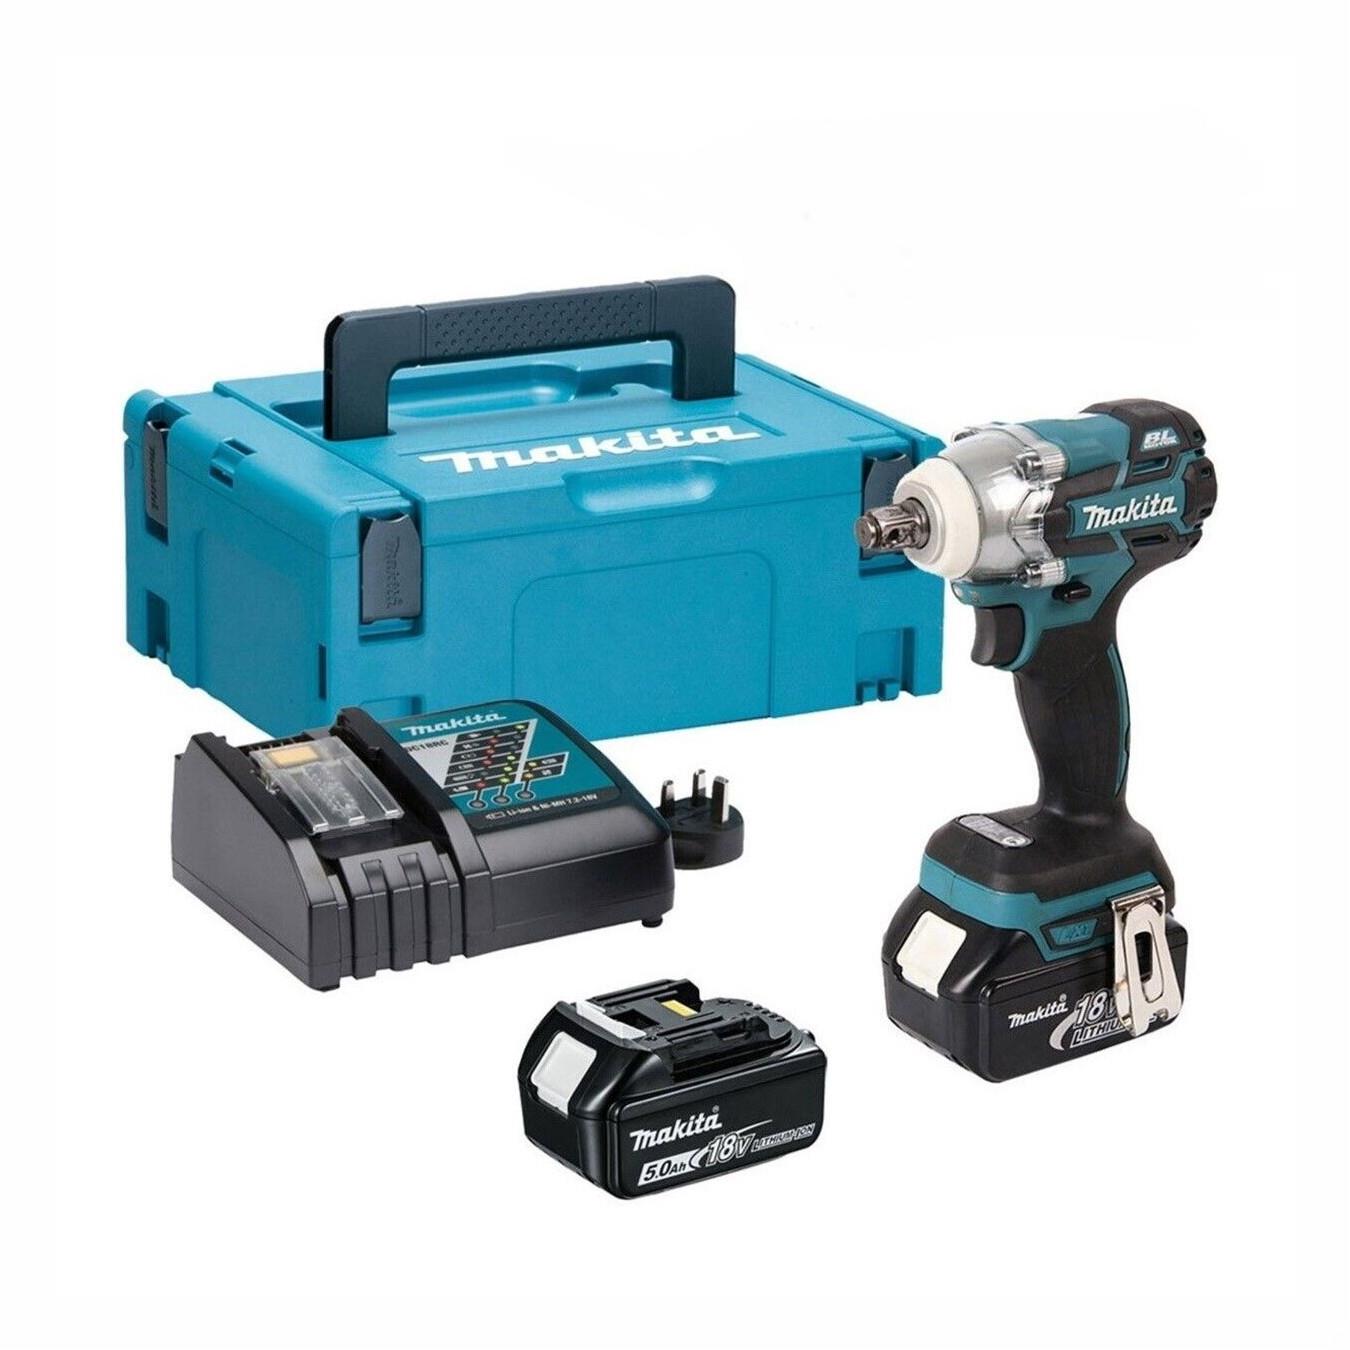 Makita DTW285RTJ Lithium-ion Powered Brushless Impact Wrench; 1/2" Square; 280Nm Torque; 18 Volt; Complete With 2 x 5.0Ah Batteries; Charger & Makpac Case